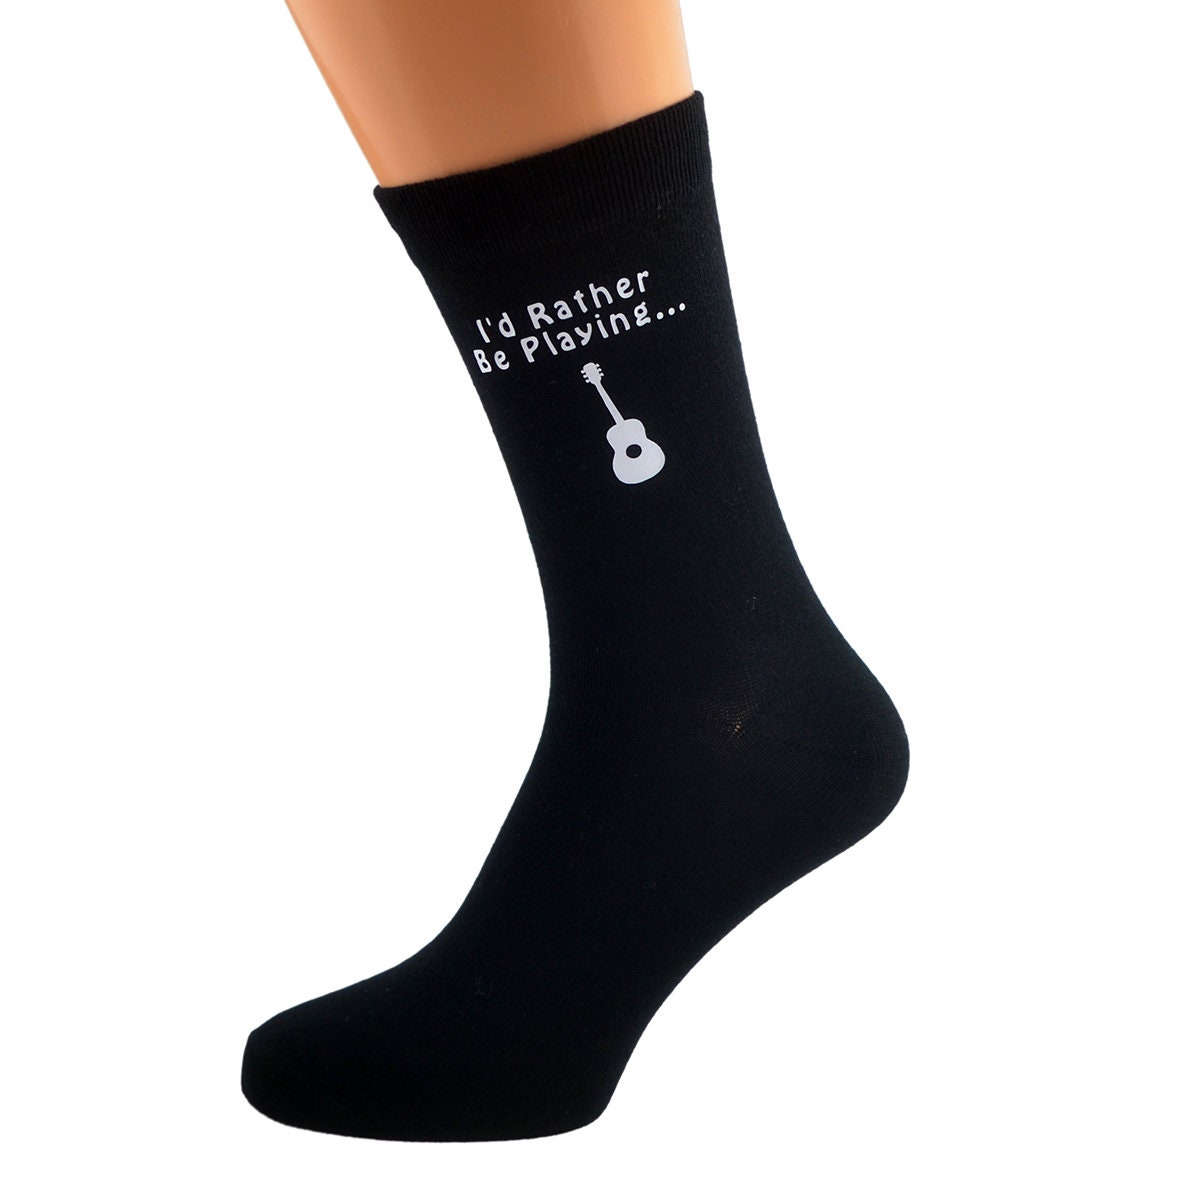 I’d Rather Be Playing Musical Guitar With Image Printed in White Vinyl On Mens Black Cotton Rich Socks Great. One Size, UK 8-12